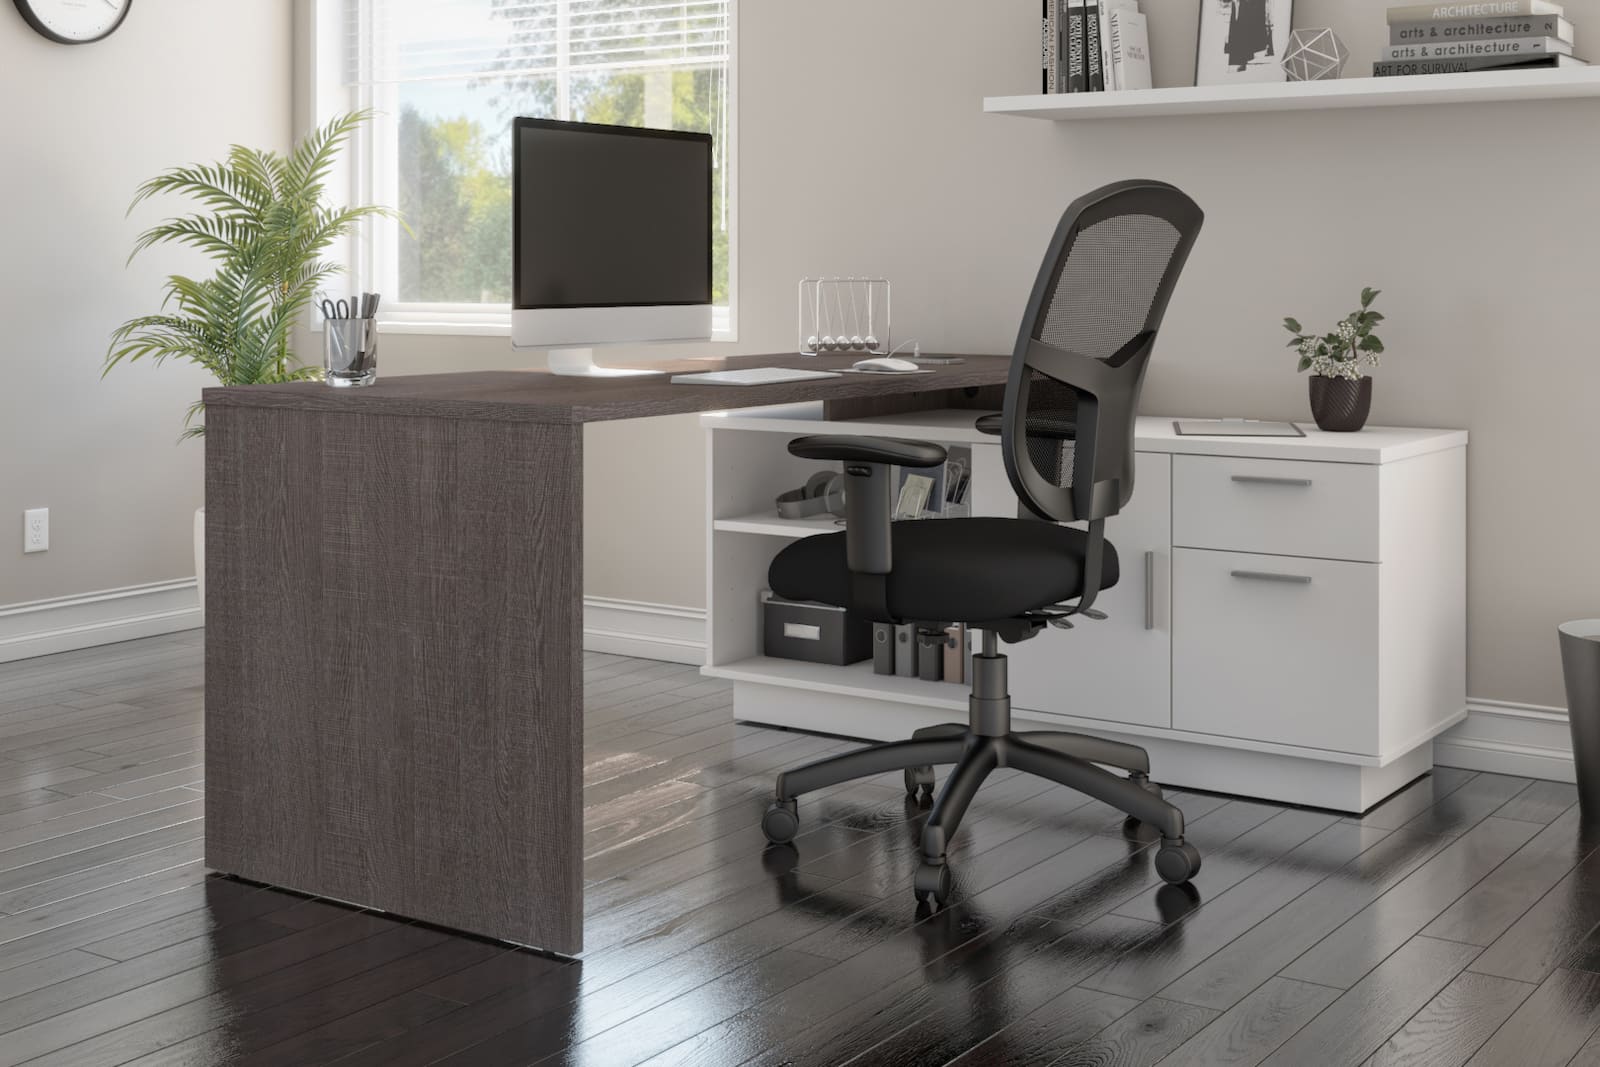 l-shaped desk with white credenza with black swivel chair and potted plant. desk computer on the desk.